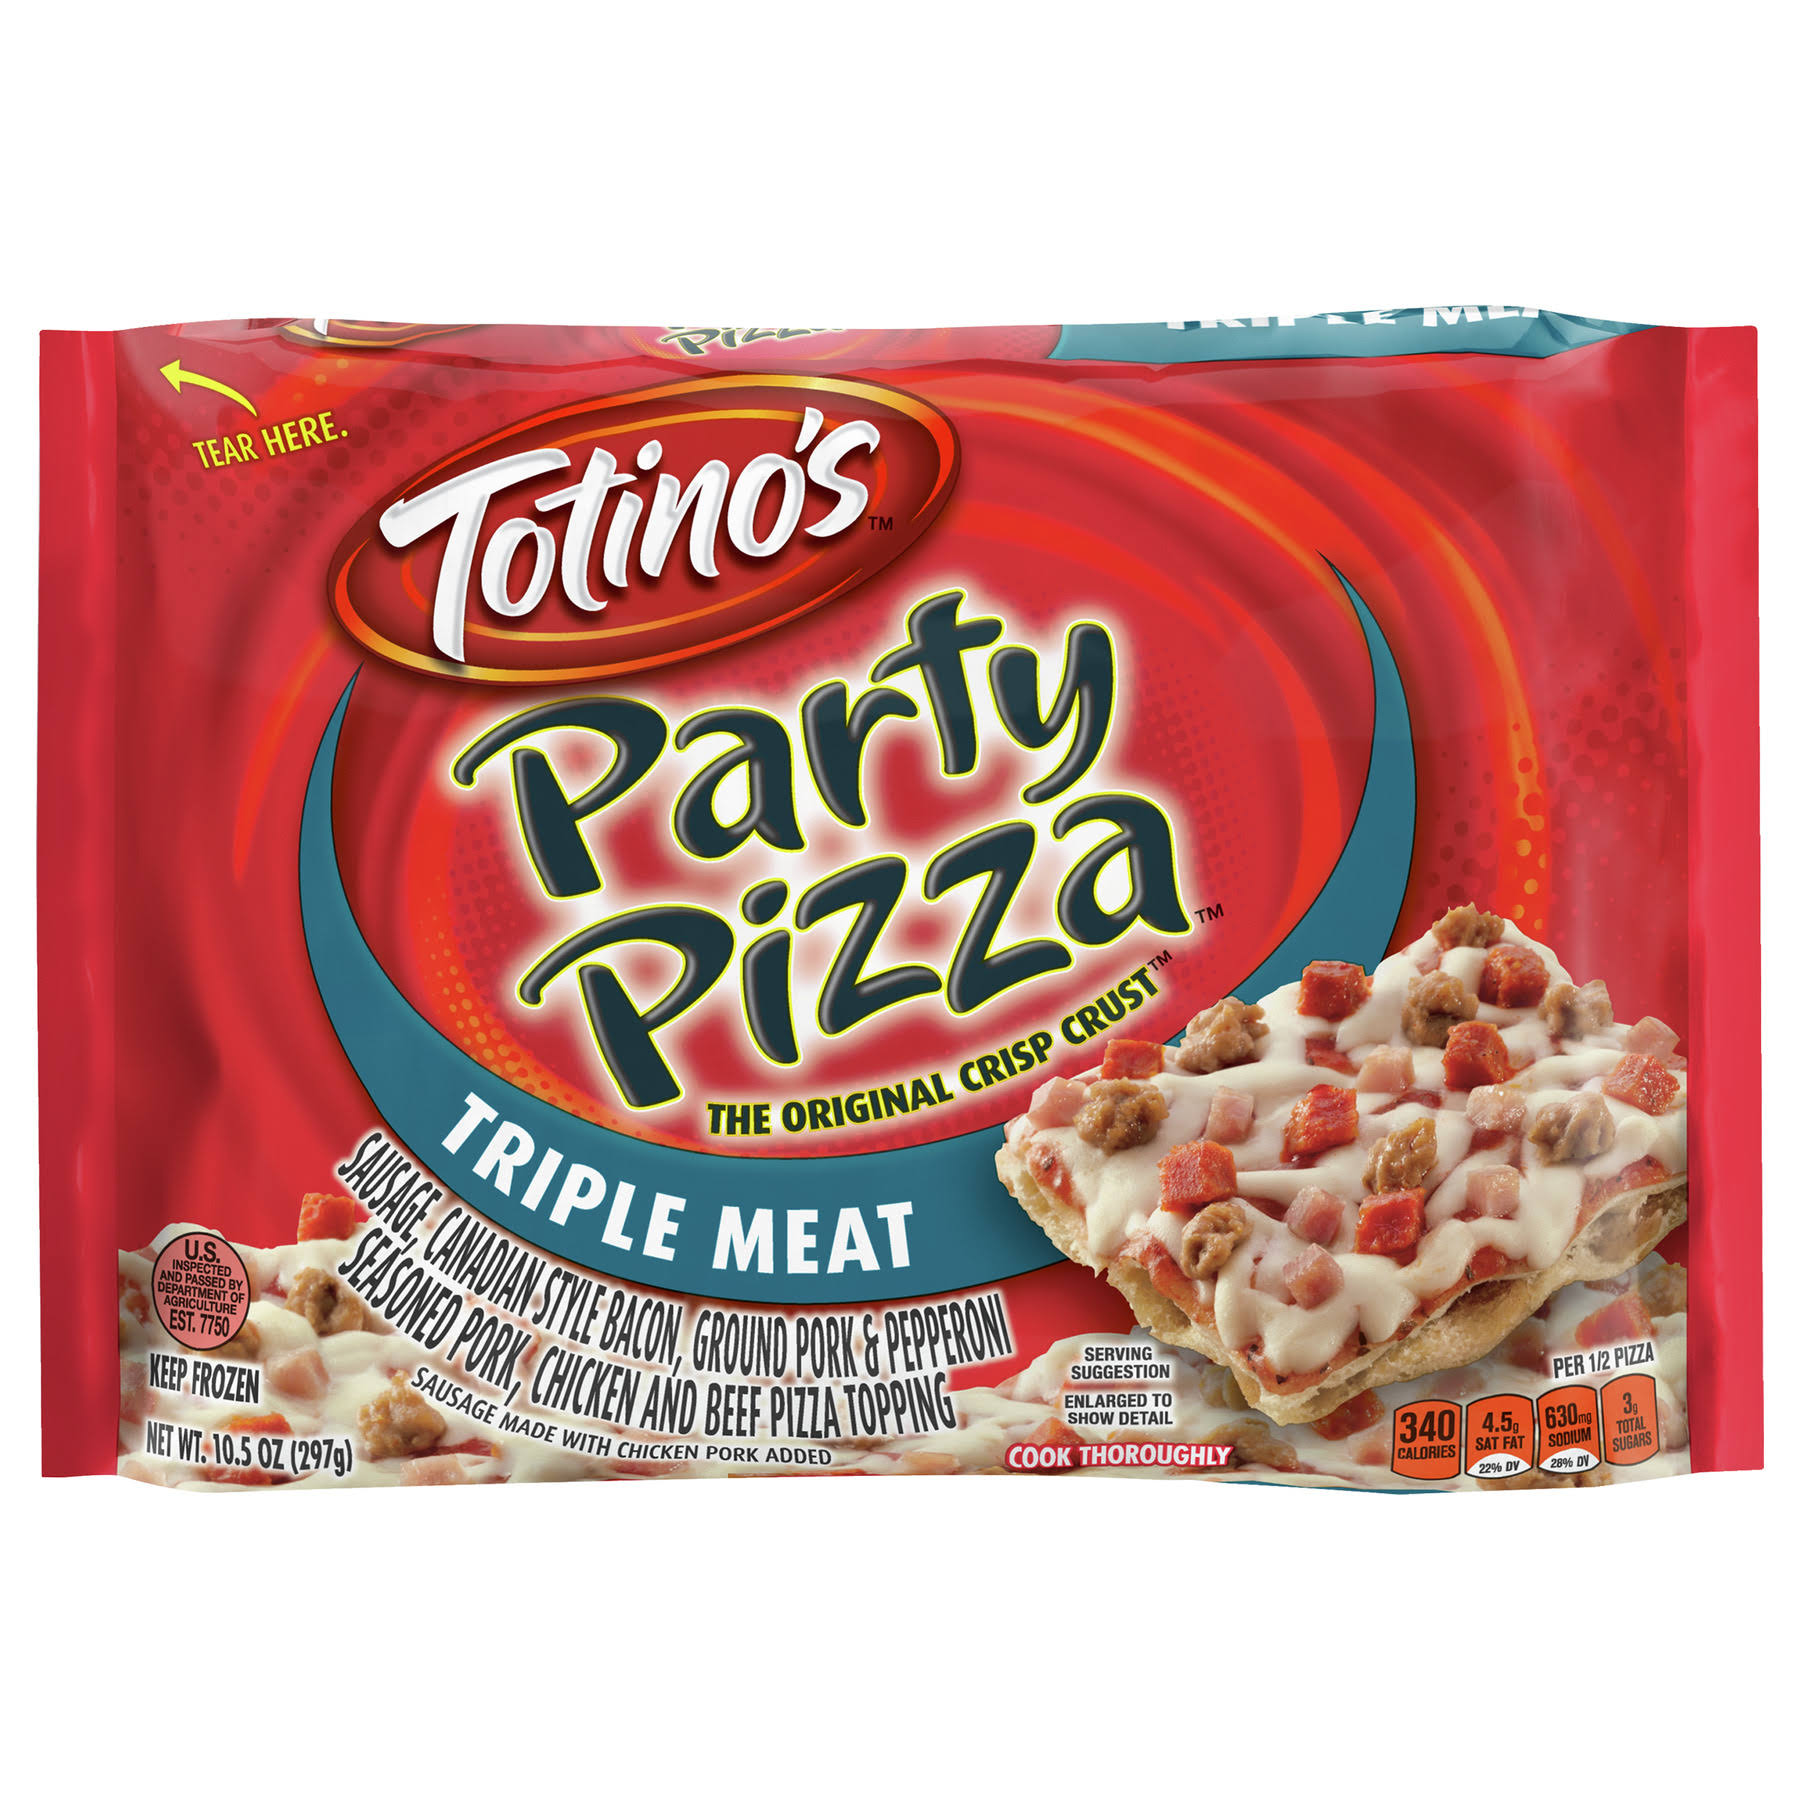 Totino's Party Pizza - Triple Meat, 10.5oz